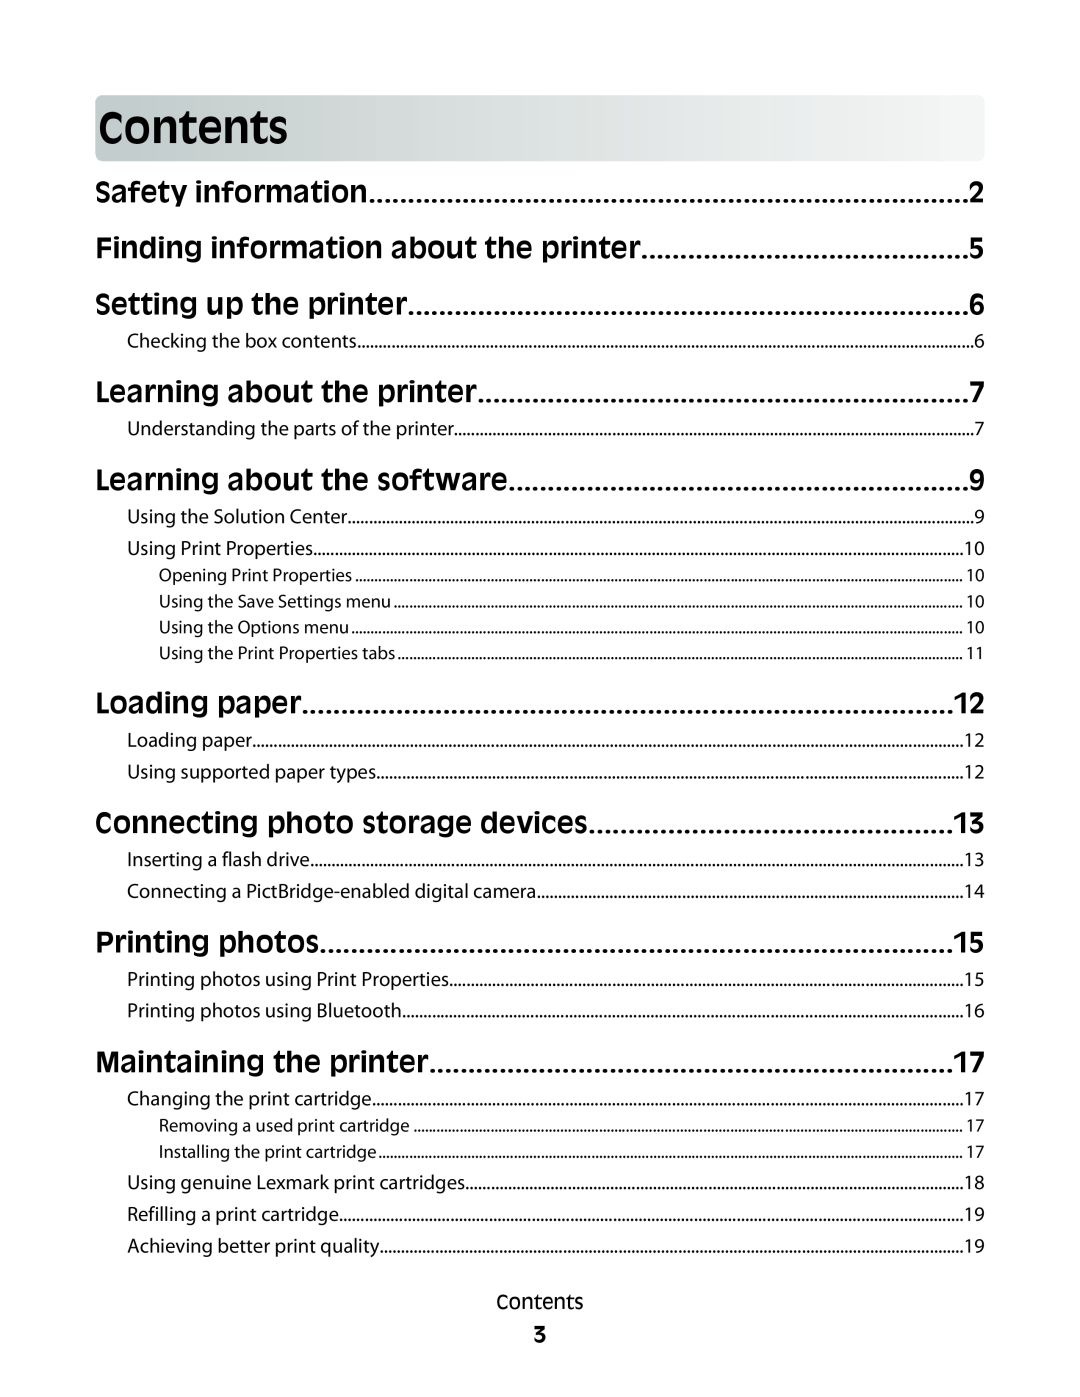 Lexmark P200 Series manual Contents, Safety information, Finding information about the printer, Setting up the printer 